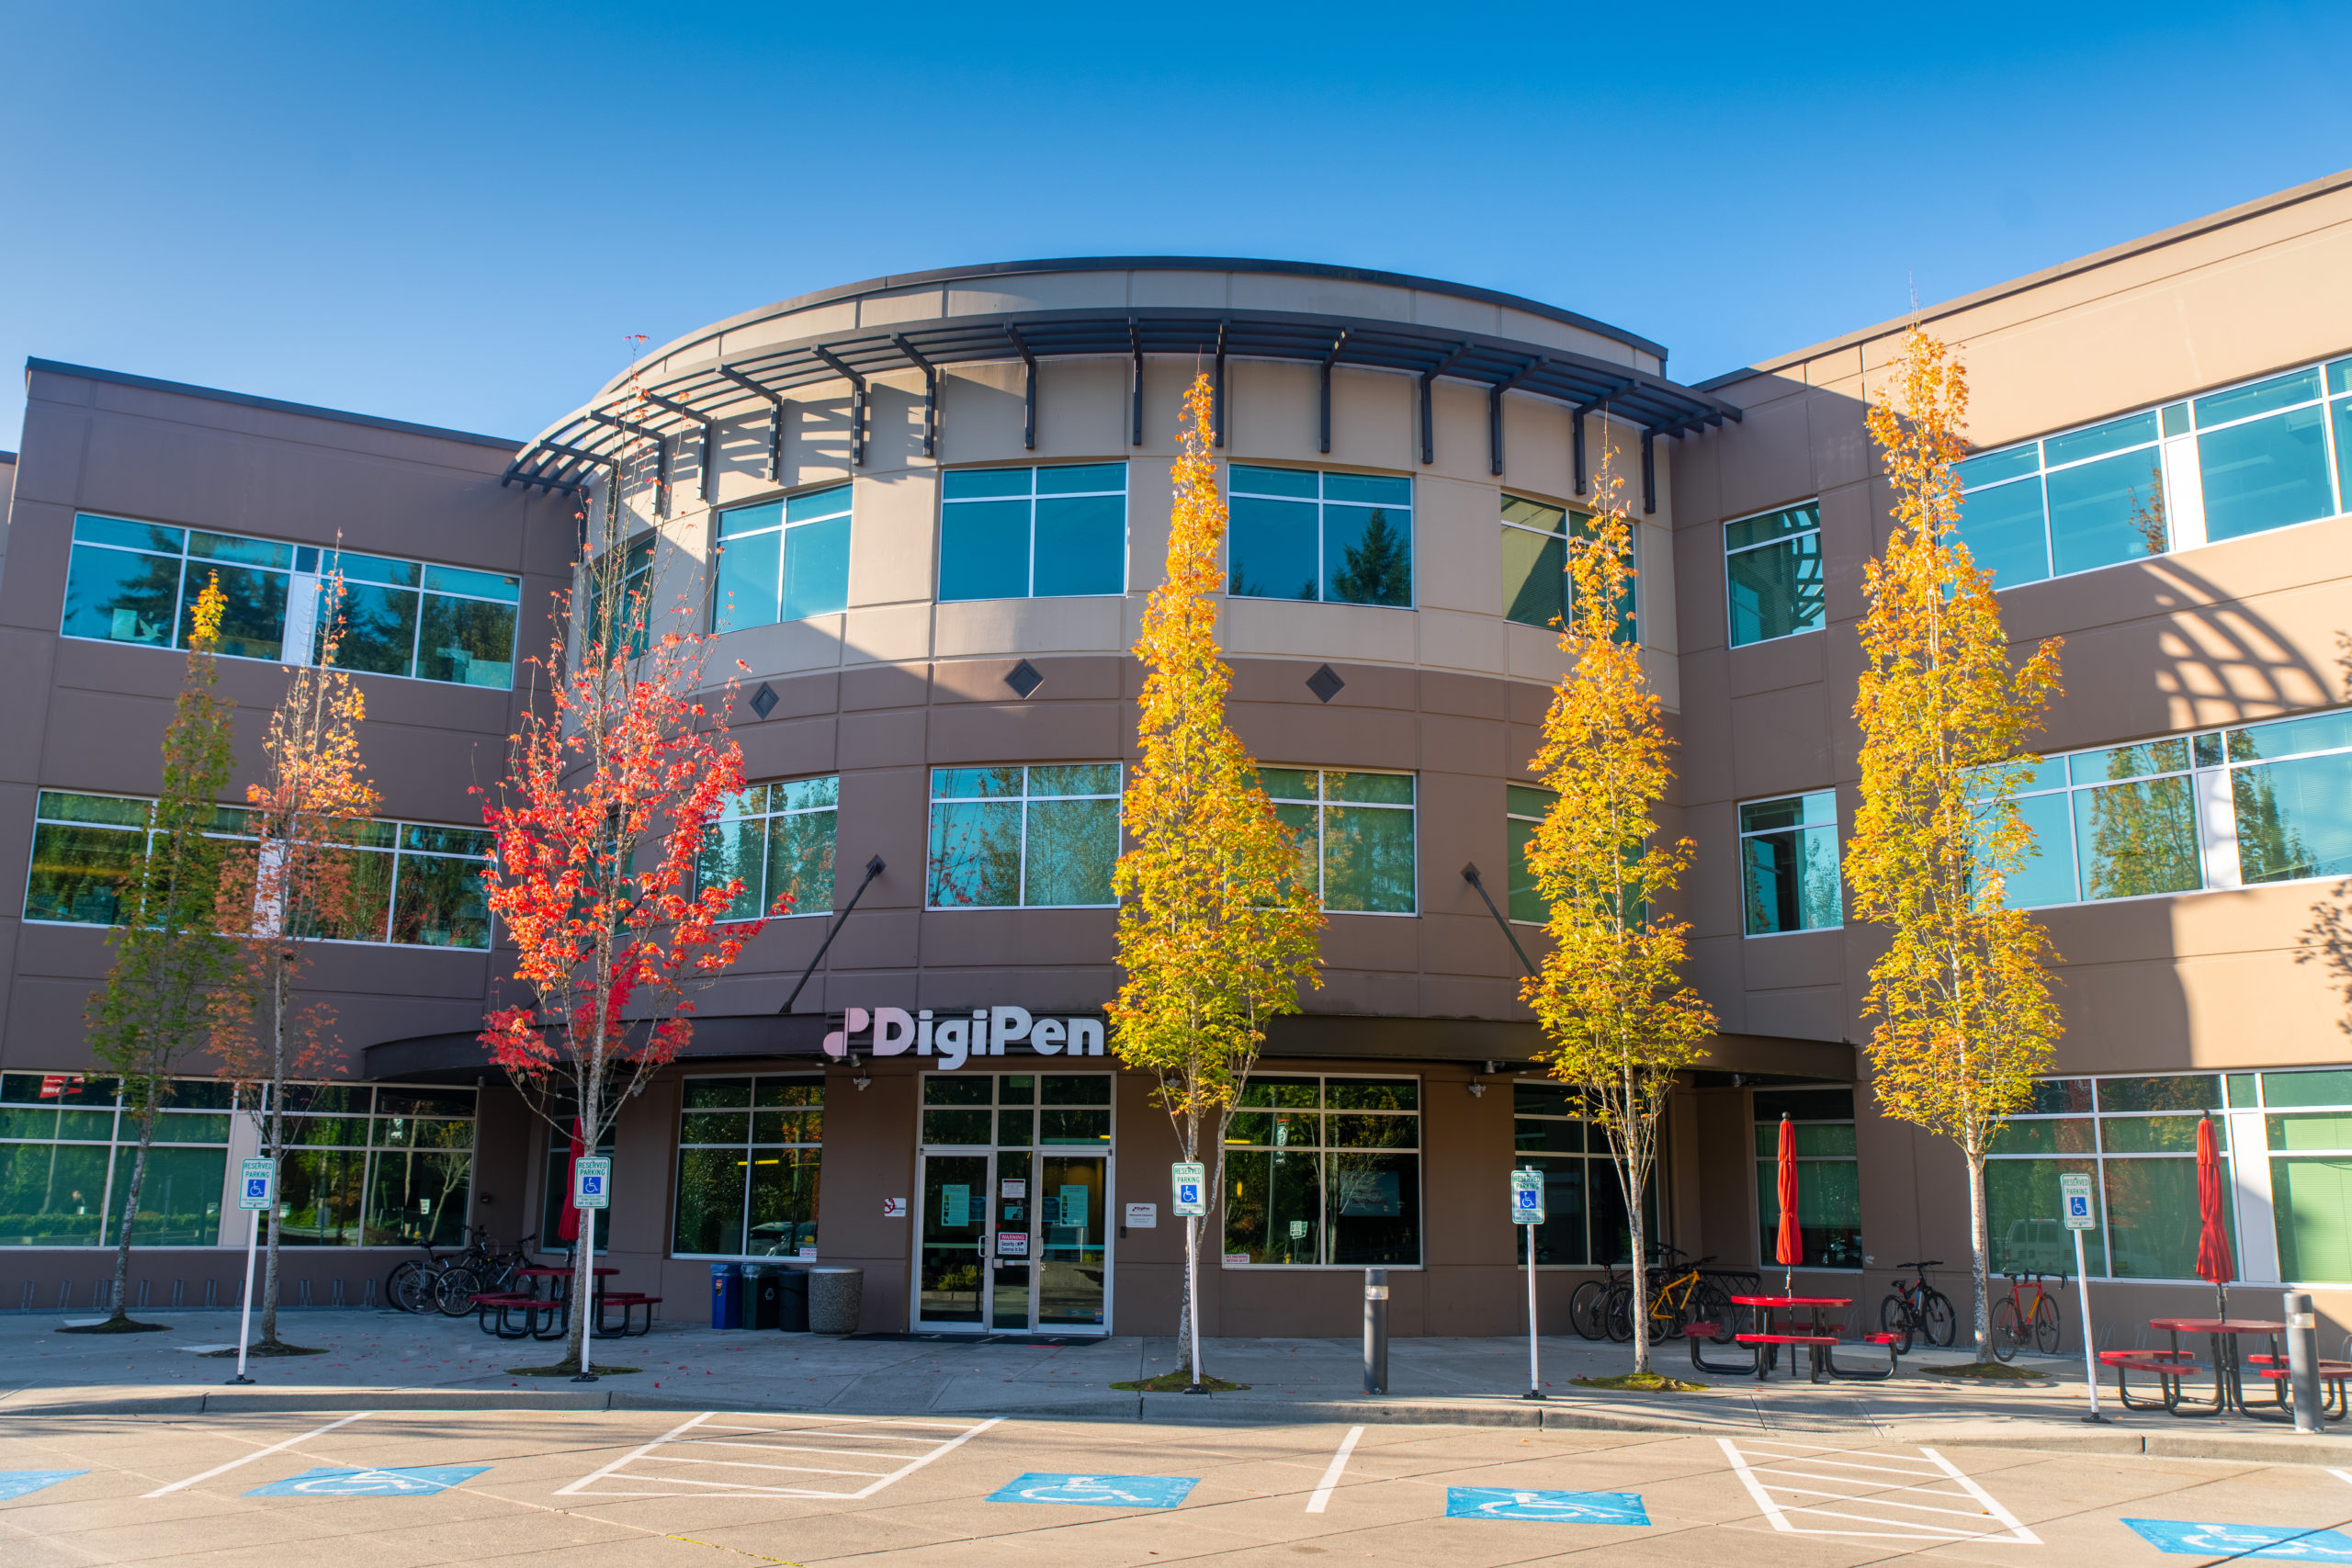 Front of DigiPen University building, entrance to building